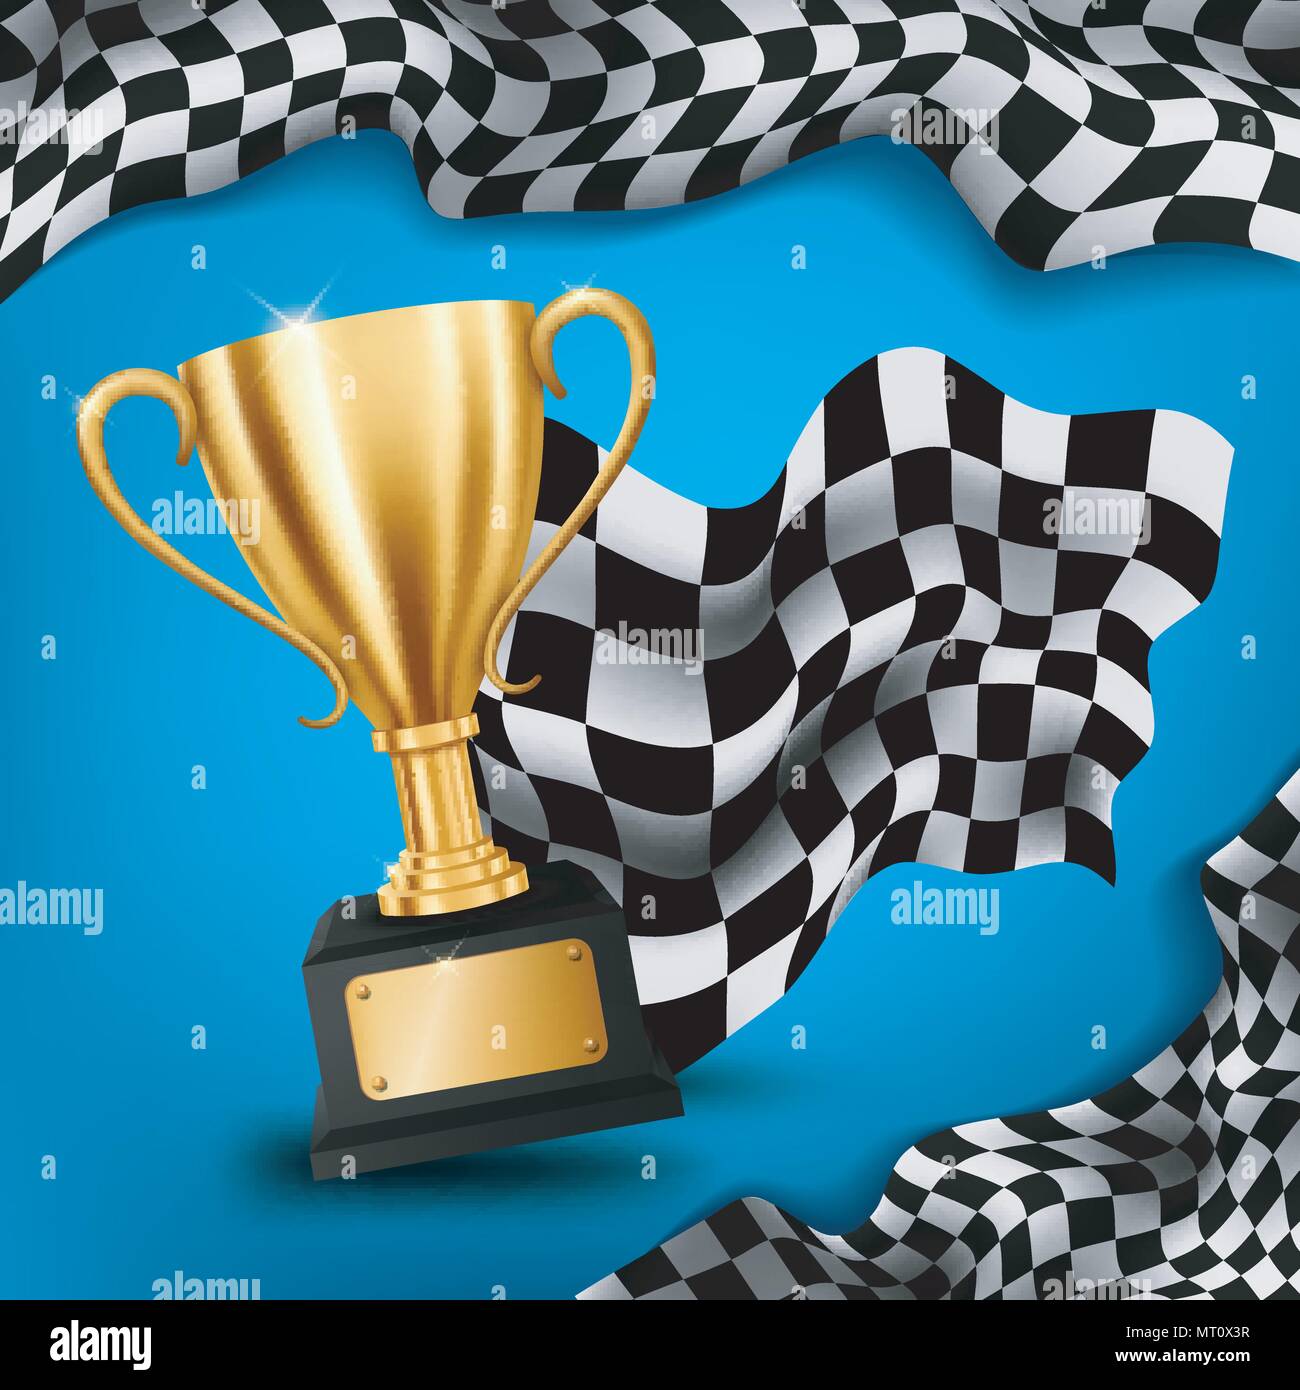 Realistic Golden Trophy with Checkered flag racing championship background, Vector Illustration Stock Vector